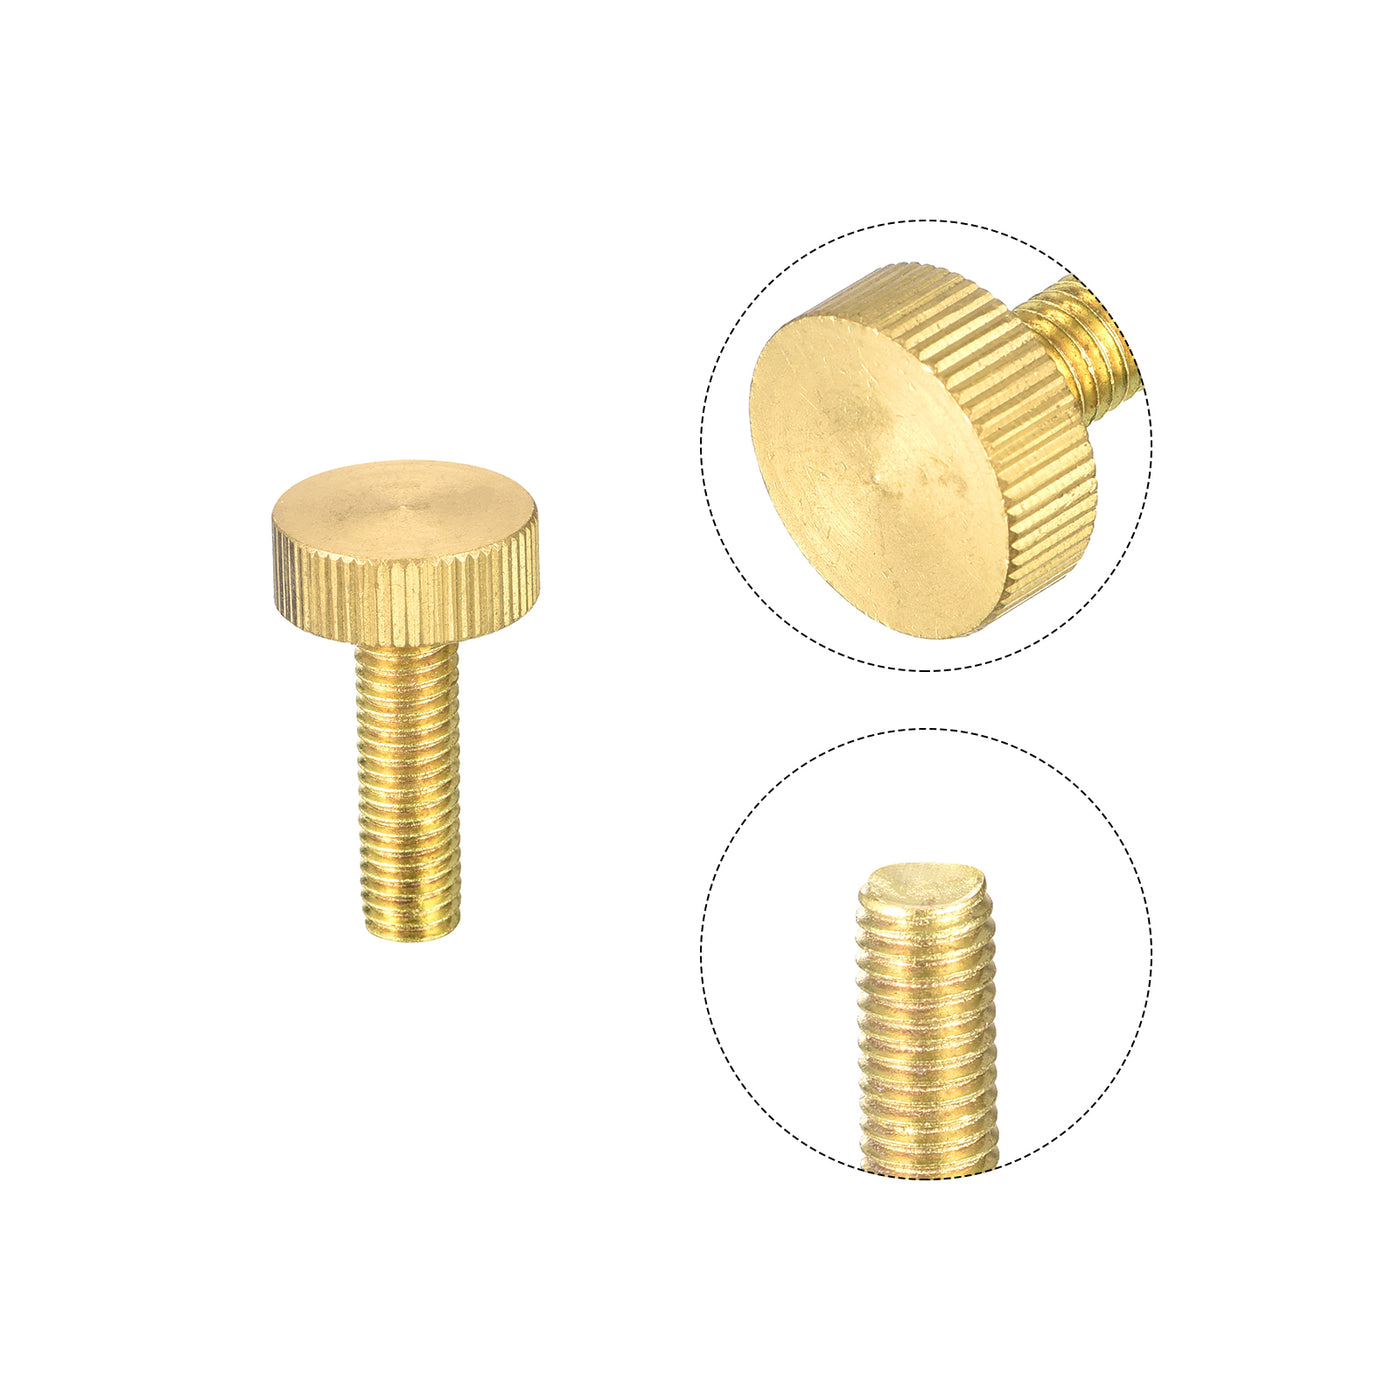 uxcell Uxcell Knurled Thumb Screws, M8x30mm Flat Brass Bolts Grip Knobs Fasteners for PC, Electronic, Mechanical 2Pcs